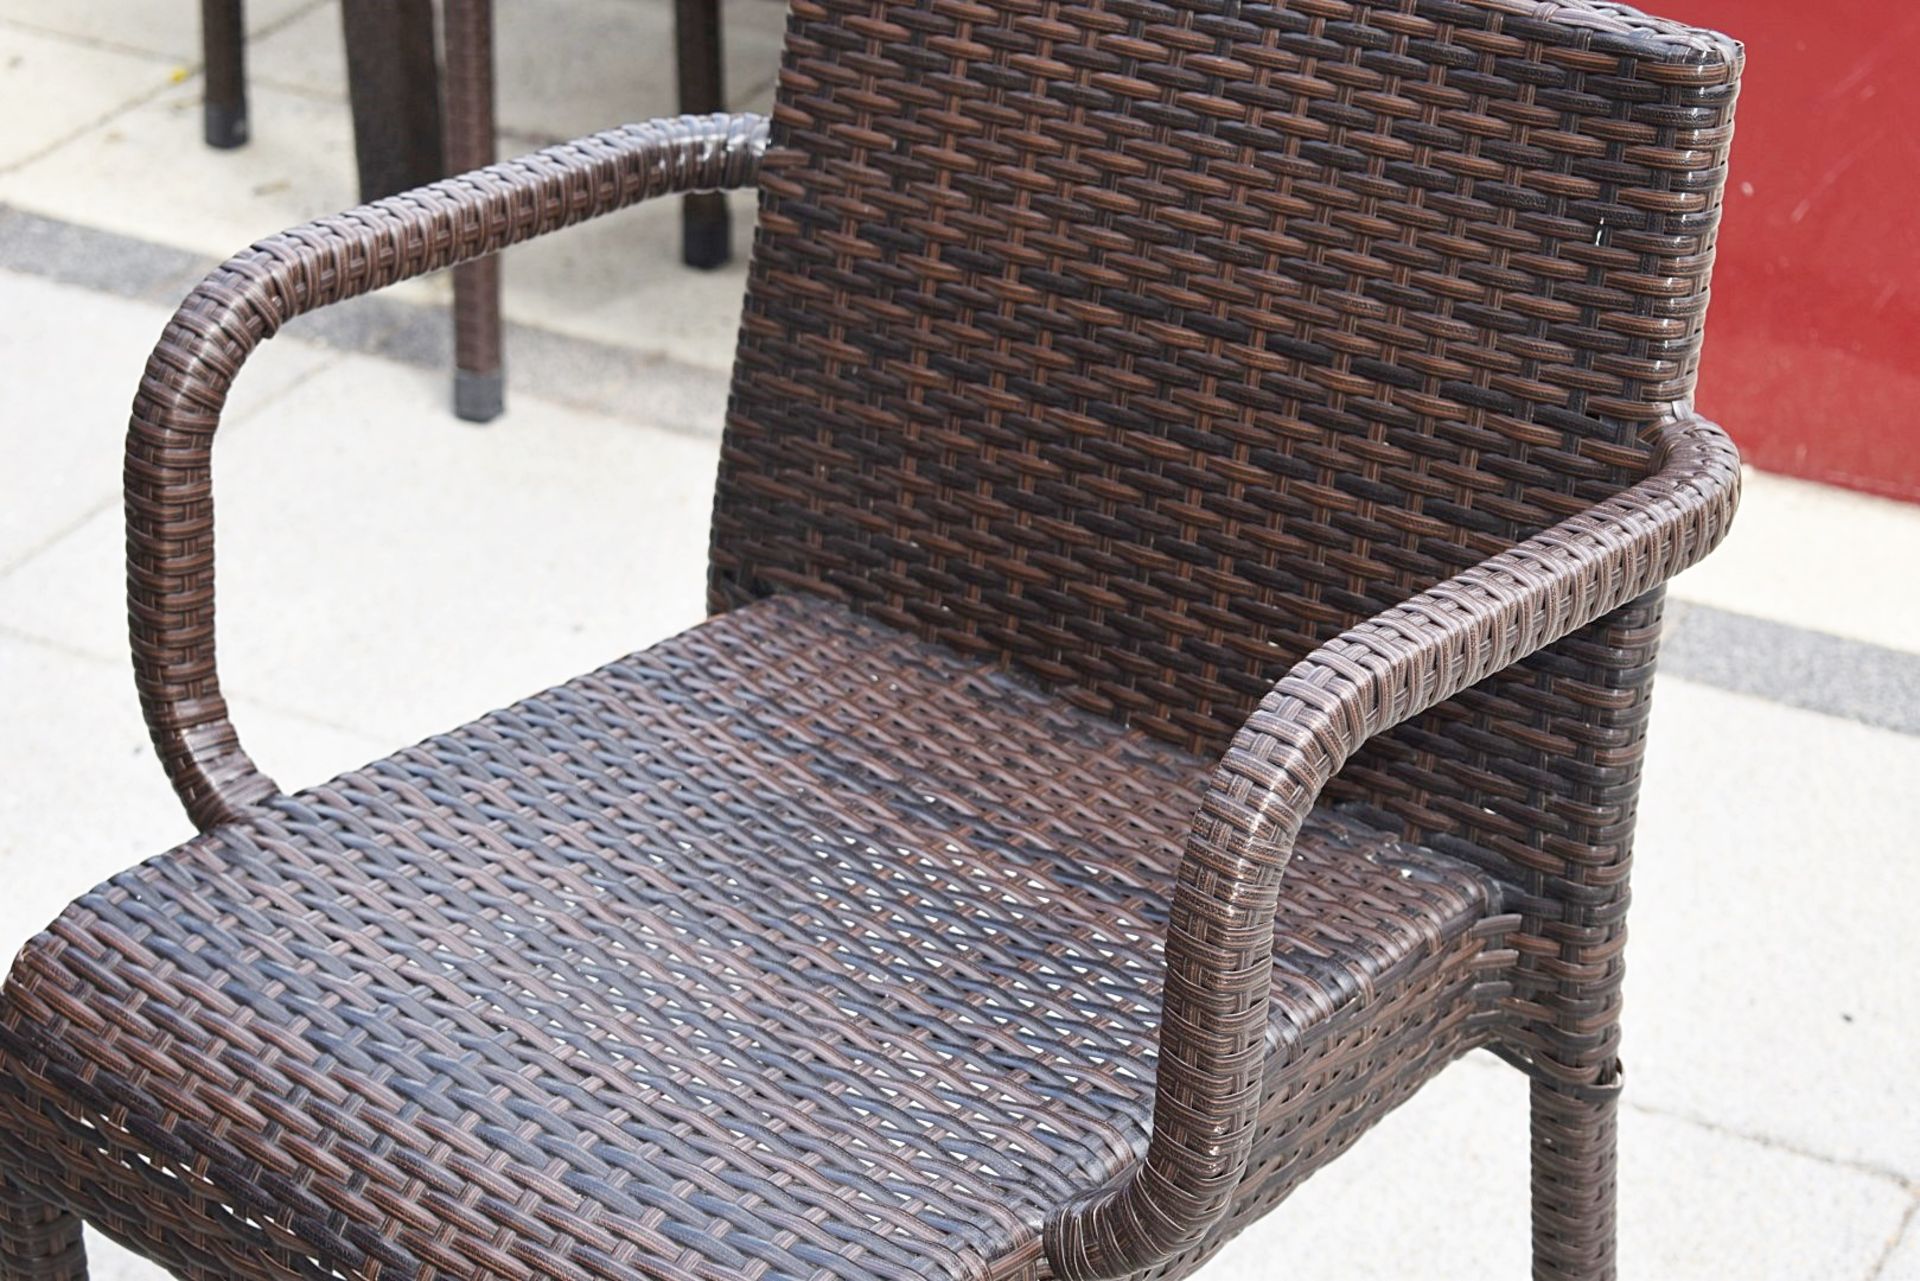 4 x Outdoor Rattan Garden Chairs With A Matching Square Table - Bild 4 aus 5